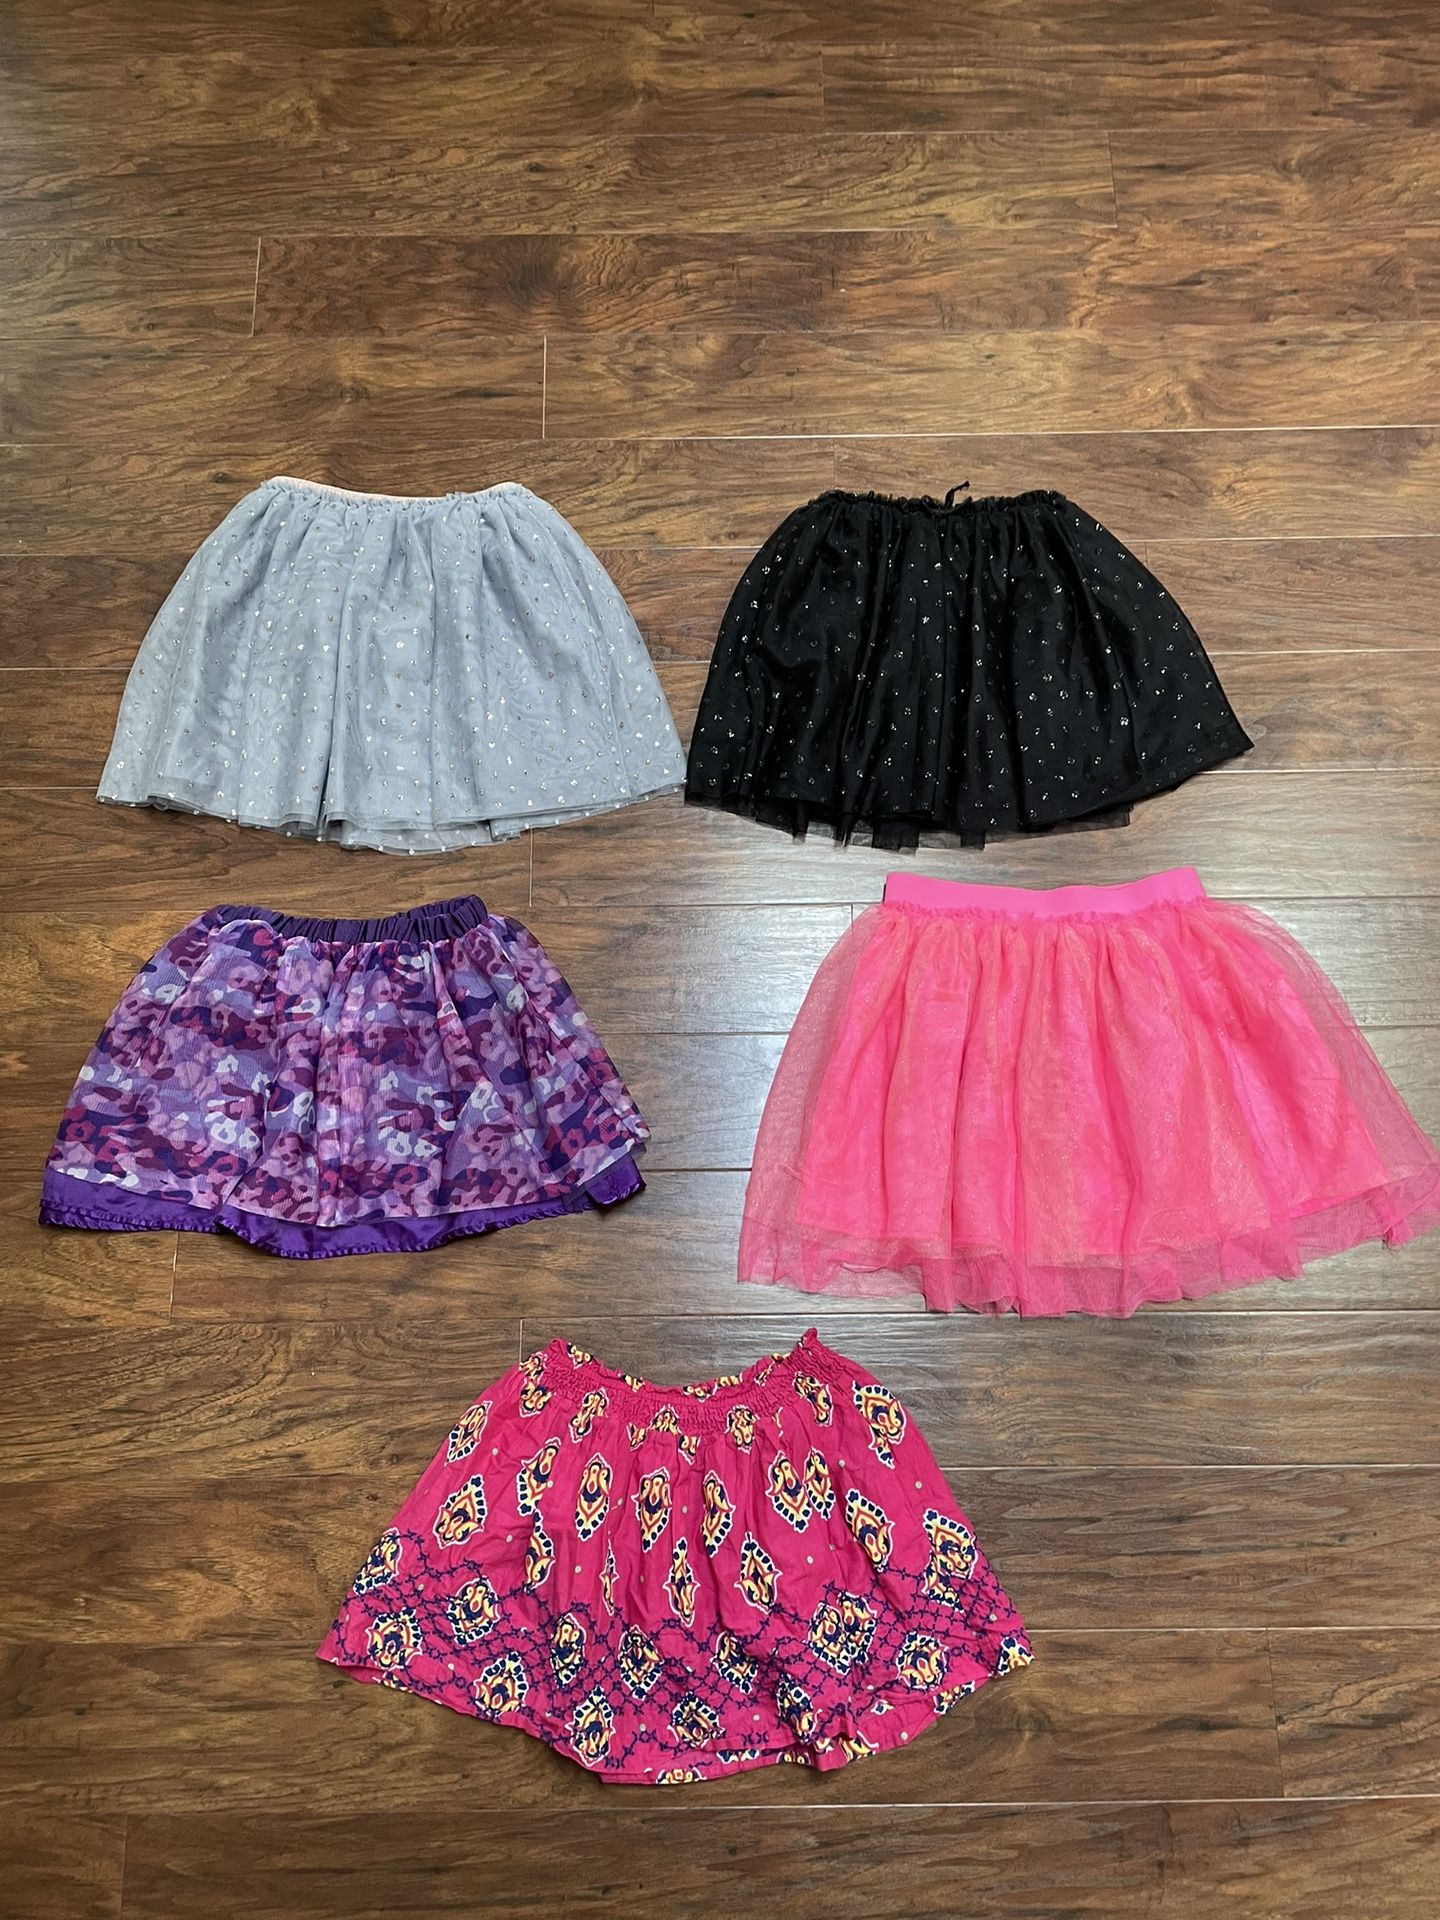 Set Of 5 Girls TUTU SKIRTS Sz 7/8 Years Pink Gray Black Glitter Outfit Christmas Birthday Party